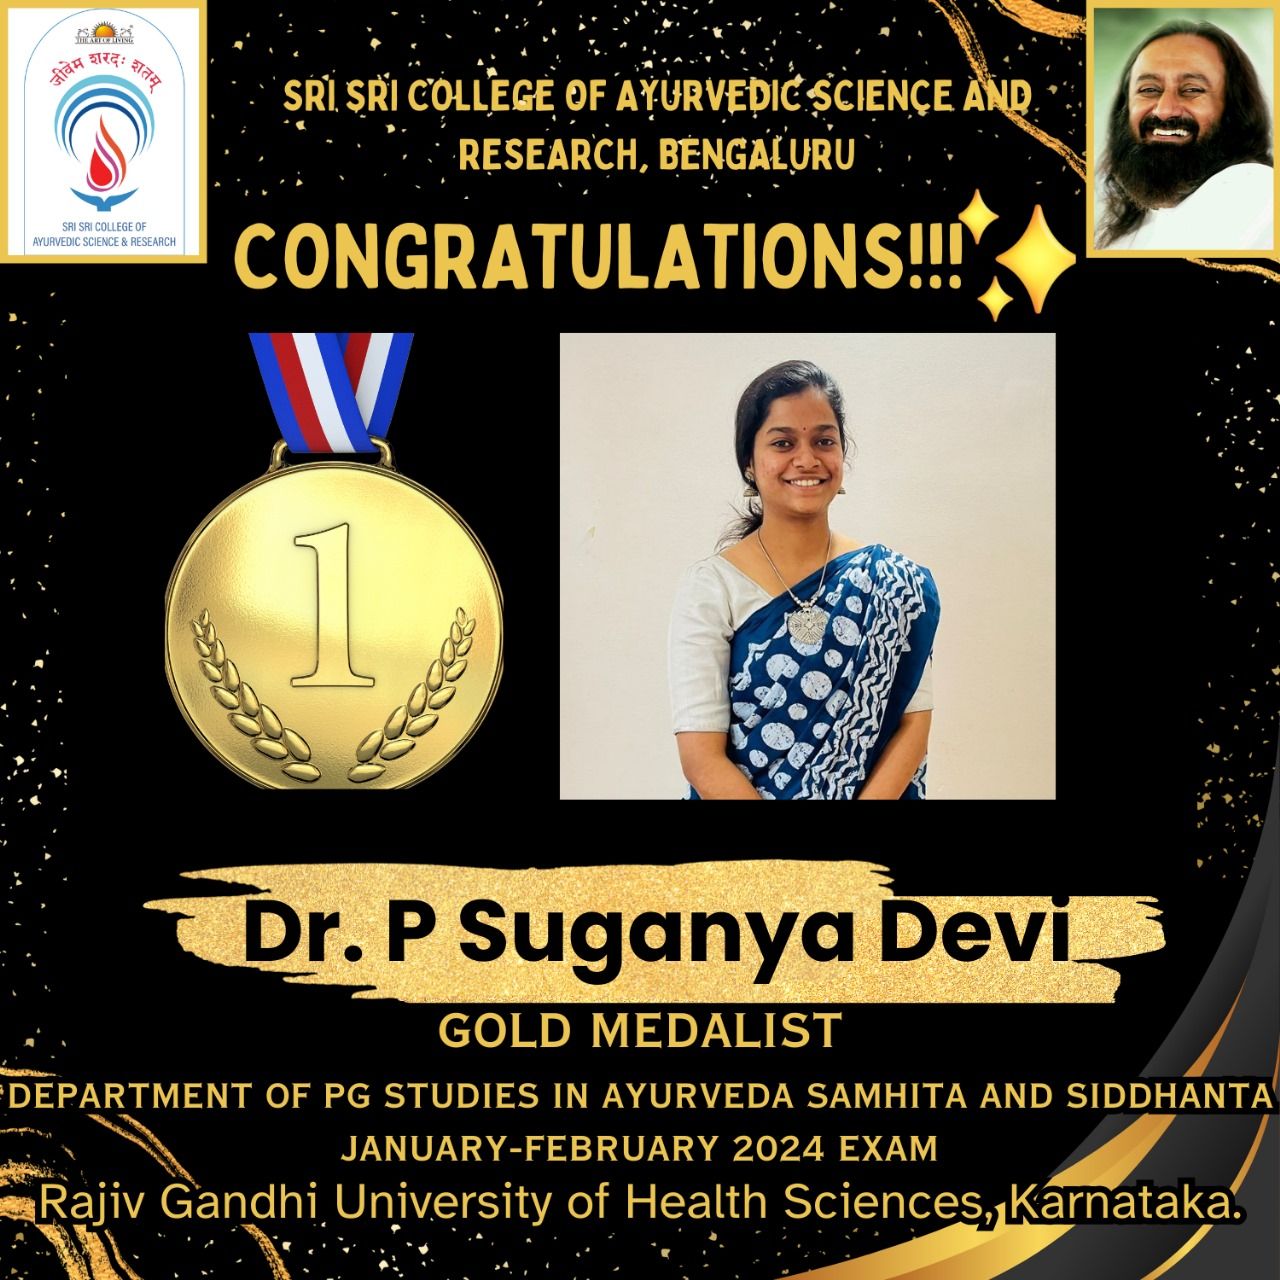 Gold Medal in the Department of PG Studies in Ayurveda Samhita and Siddhanta.